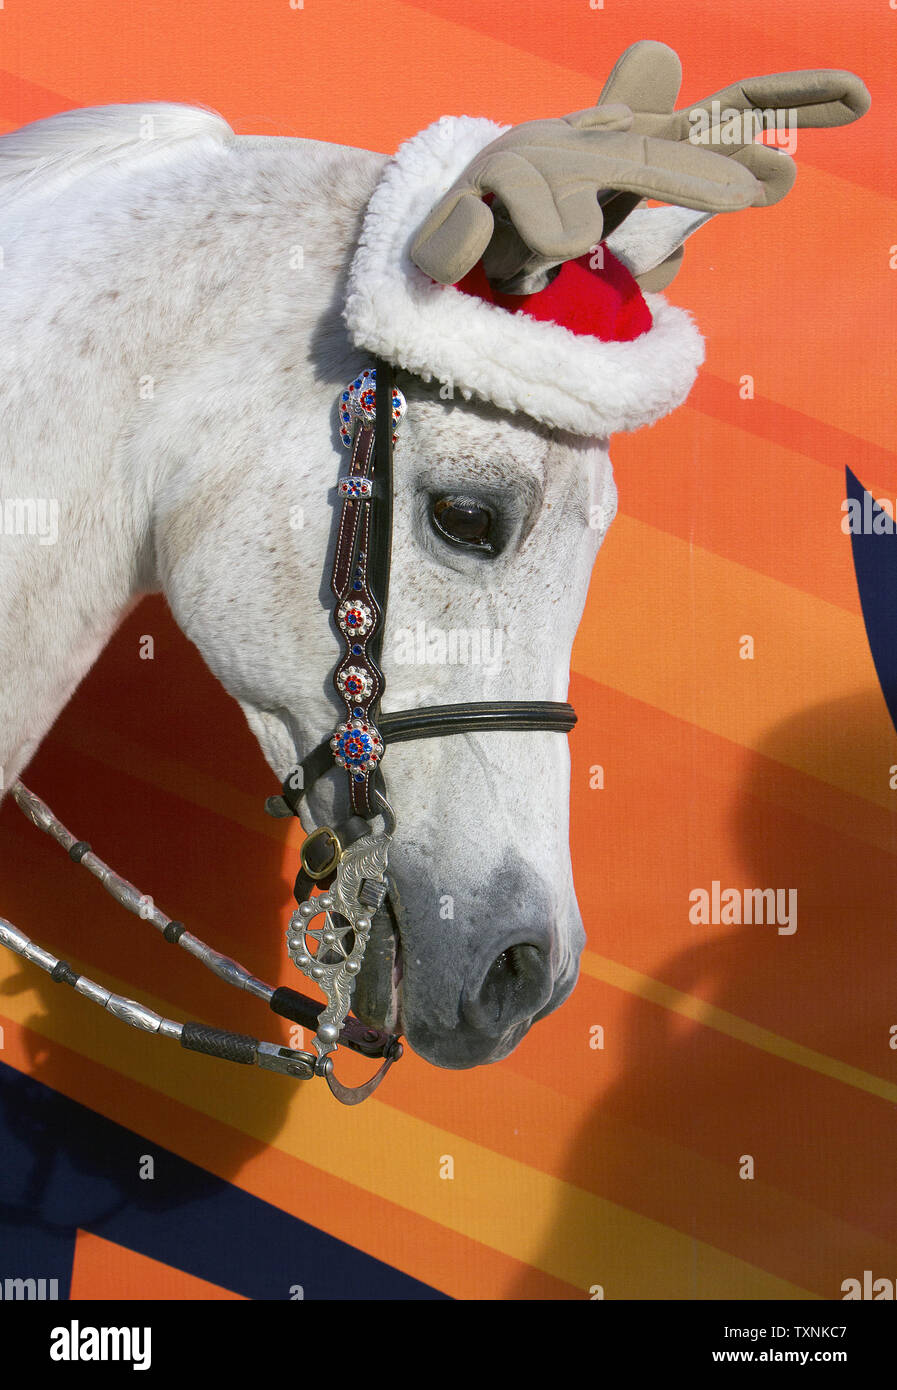 The Denver Broncos arabian horse mascot Thunder wears antlers in celebration of Christmas at Sports Authority Field at Mile High on December 23, 2012 in Denver.  Denver continues its drive to earn a first round playoff bye entering the game against Cleveland as the AFC's number two seeded team.    UPI/Gary C. Caskey Stock Photo